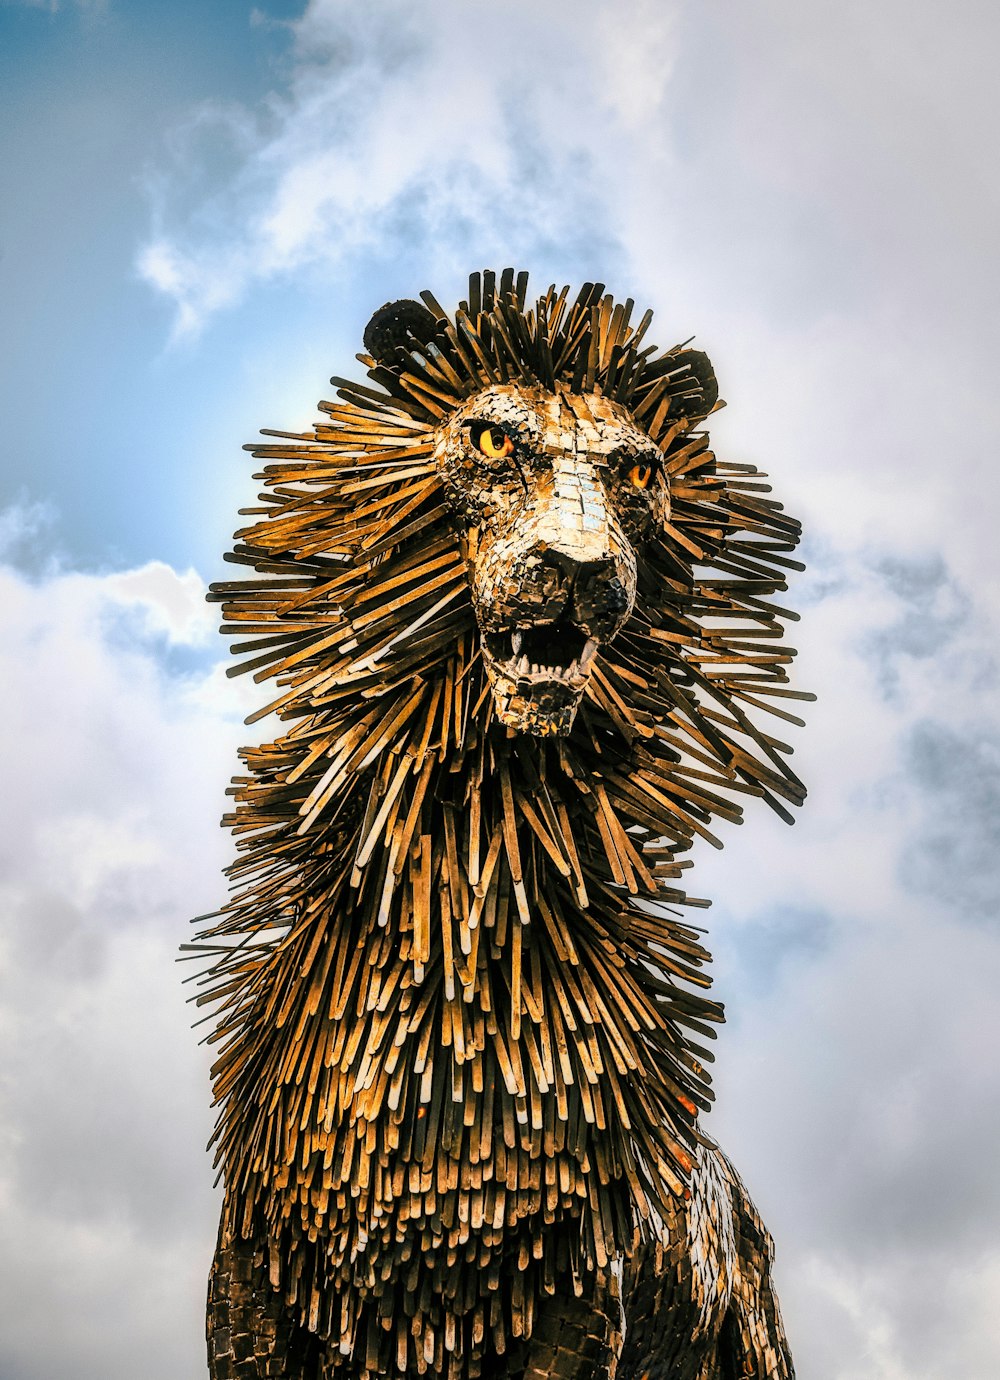 gold and black lion head statue under white clouds and blue sky during daytime